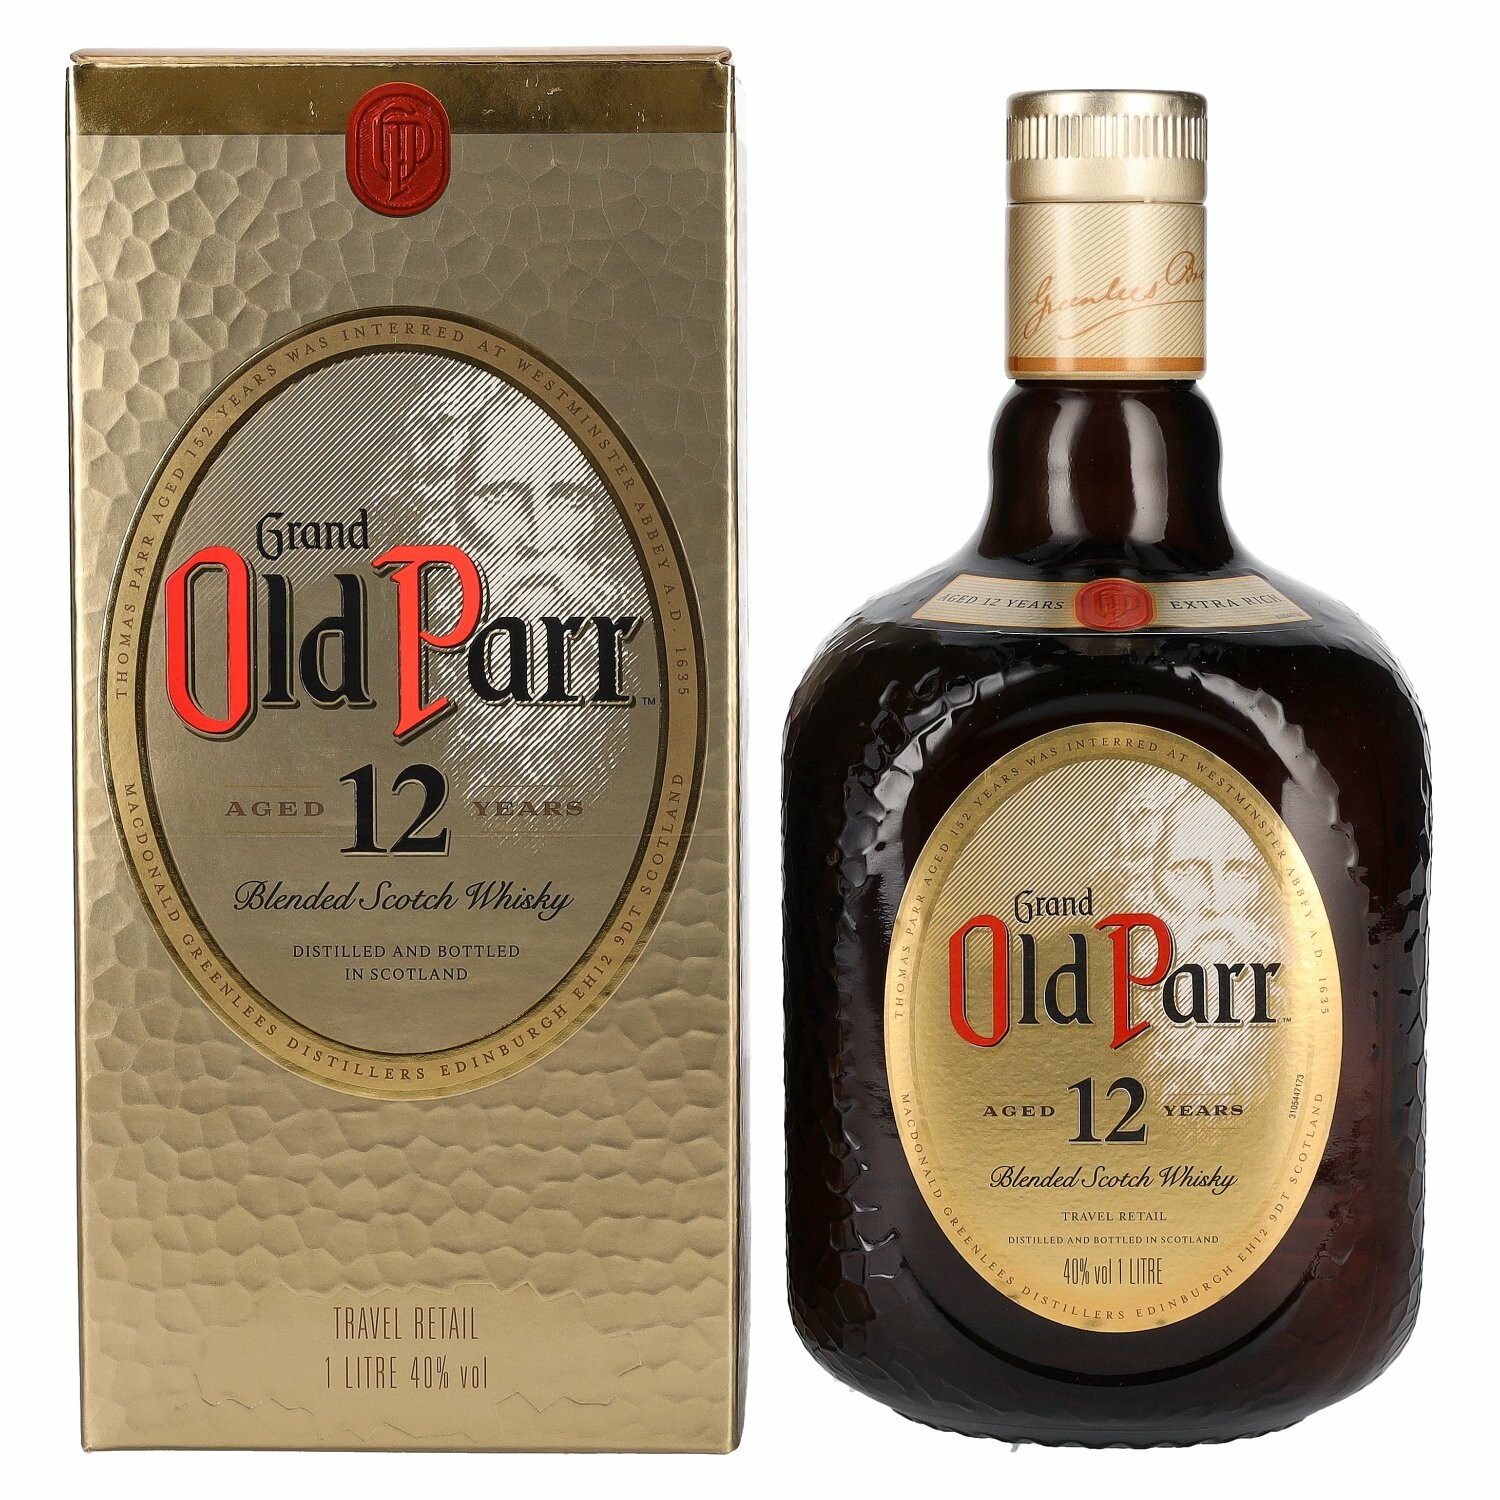 Grand Old Parr 12 Years Old Blended Scotch Whisky 40% Vol. 1l in Giftbox